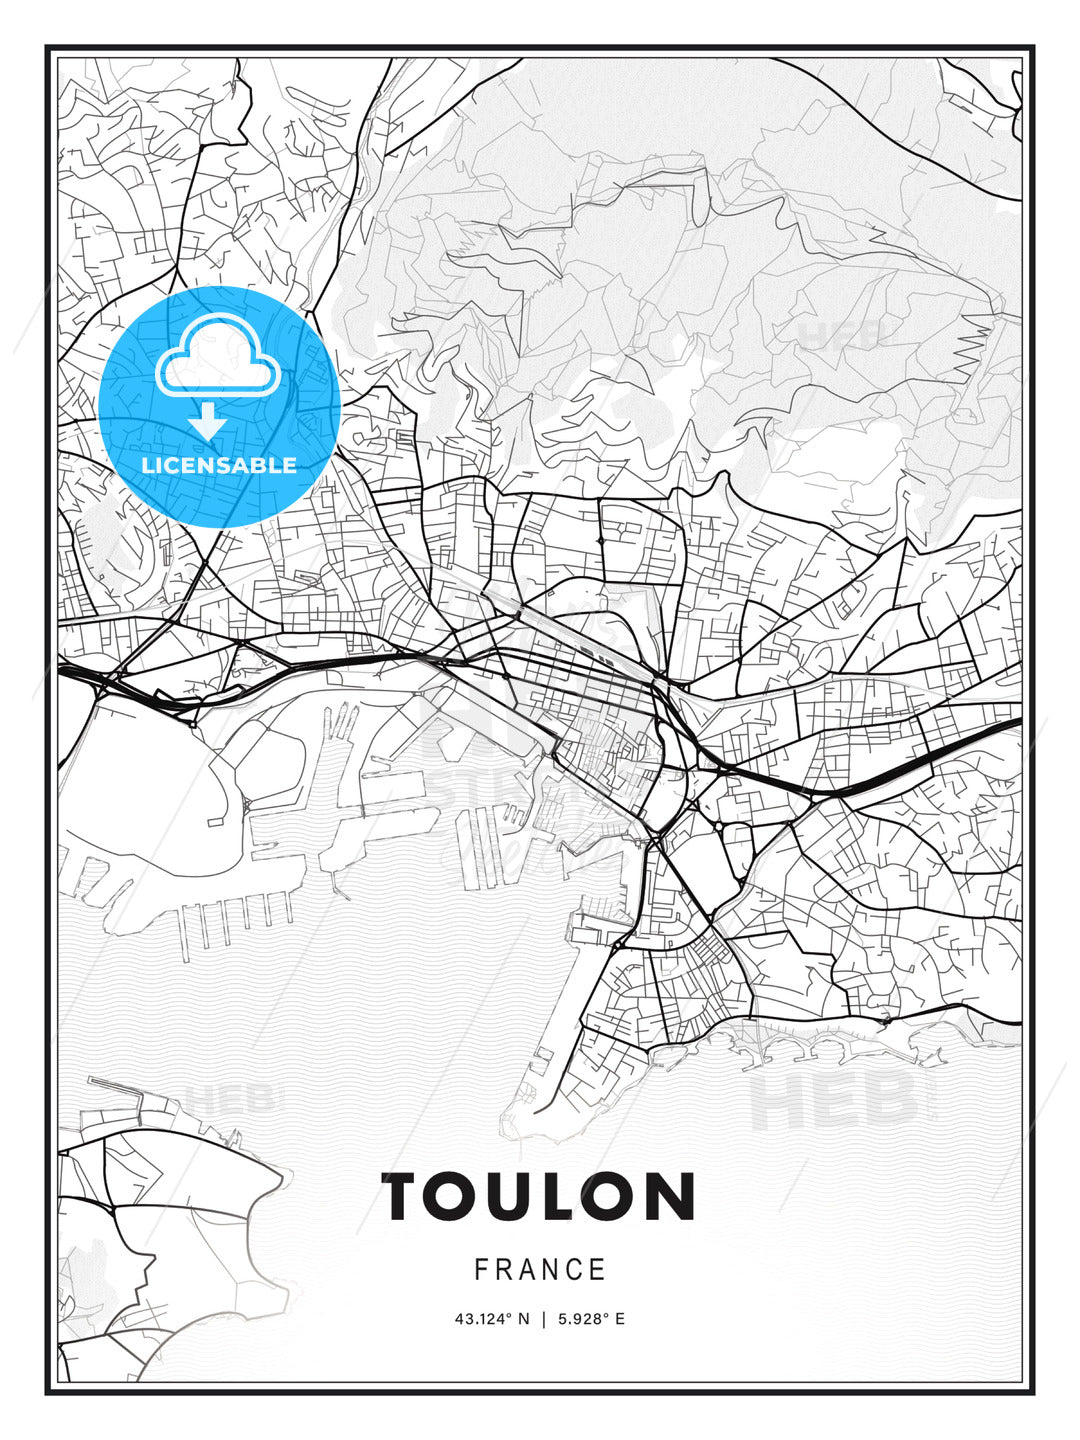 Toulon, France, Modern Print Template in Various Formats - HEBSTREITS Sketches